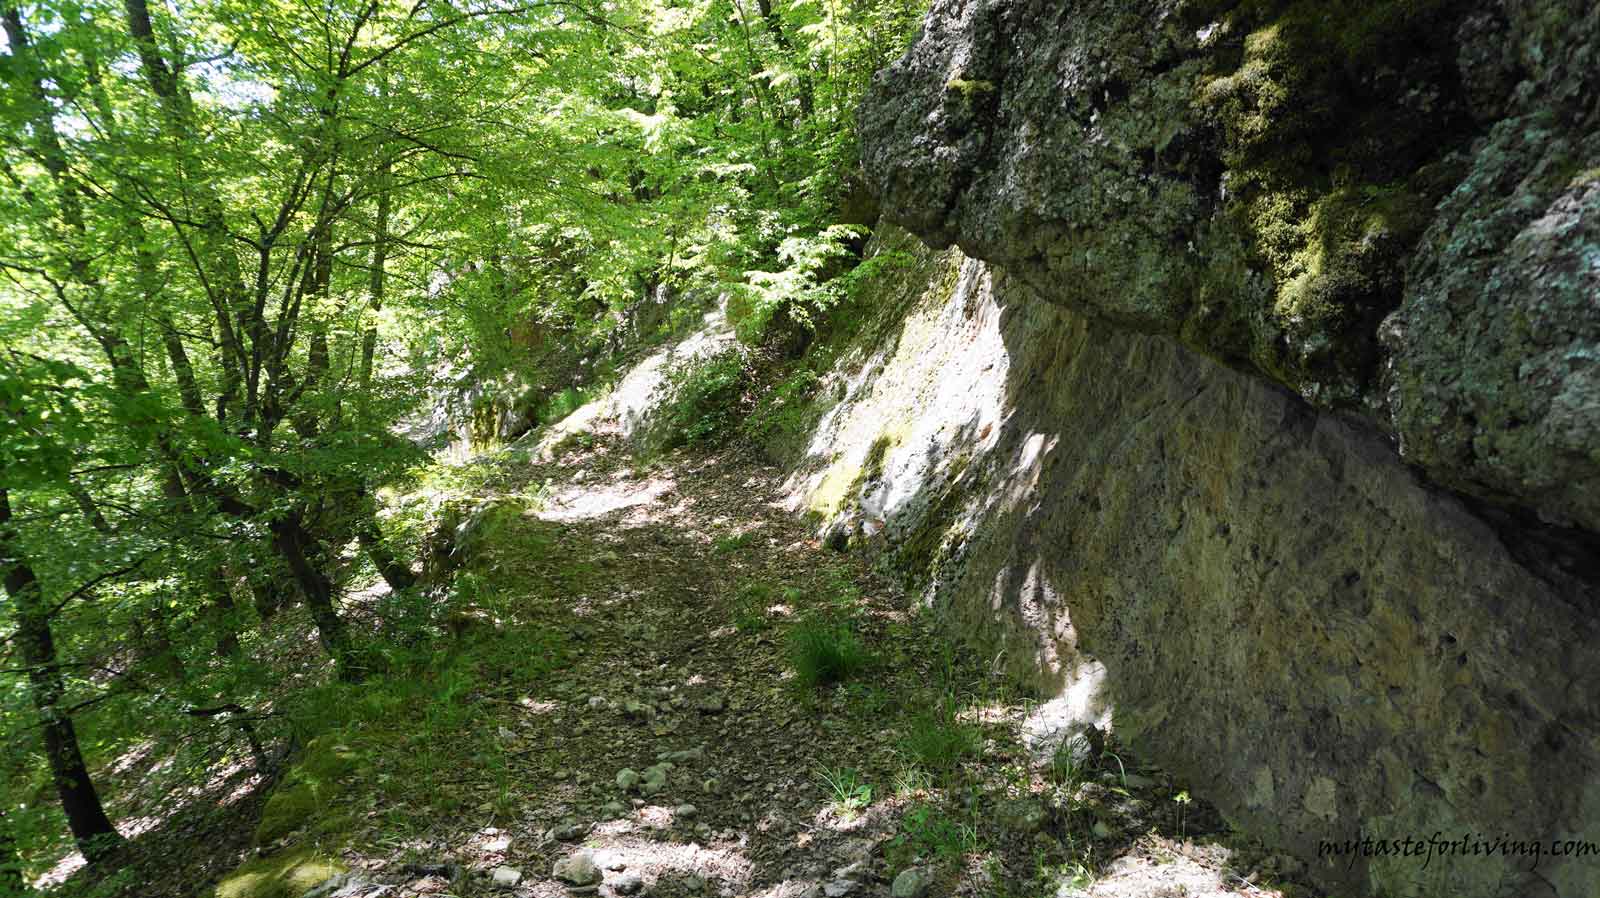 The thracian rock sanctuaries with mysterious trapezoidal rock niches carved in them are typical of the Eastern Rhodopes. The forests above the village of Nochevo are full of similar niches and small caves (like Kodja yin) and sharapani.